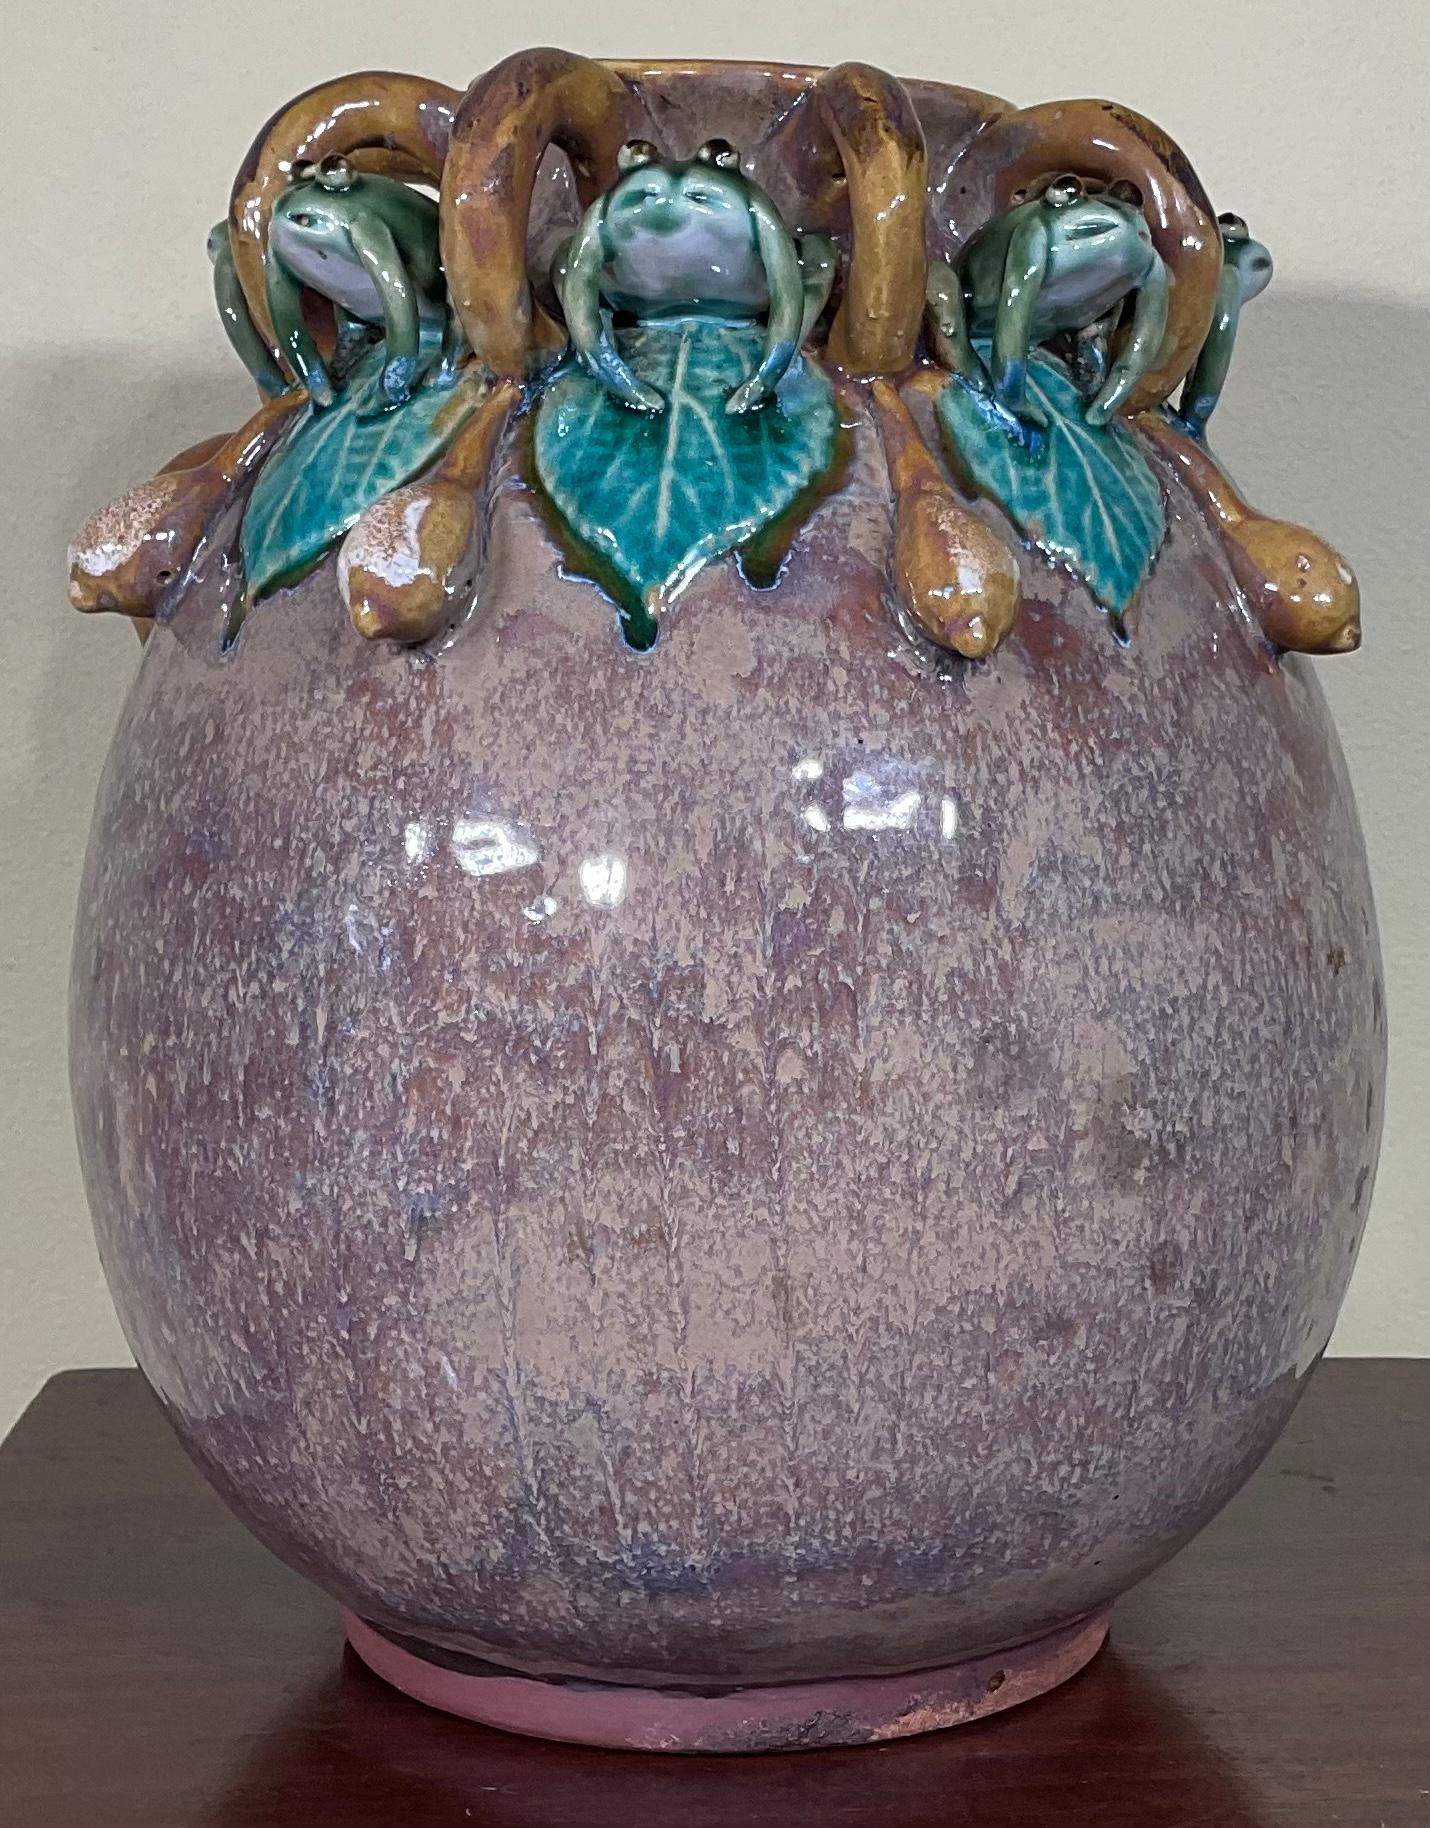 Beautiful hand made vase made of ceramic hand painter with a group of frogs surrounded the rim.
great object of art for display.